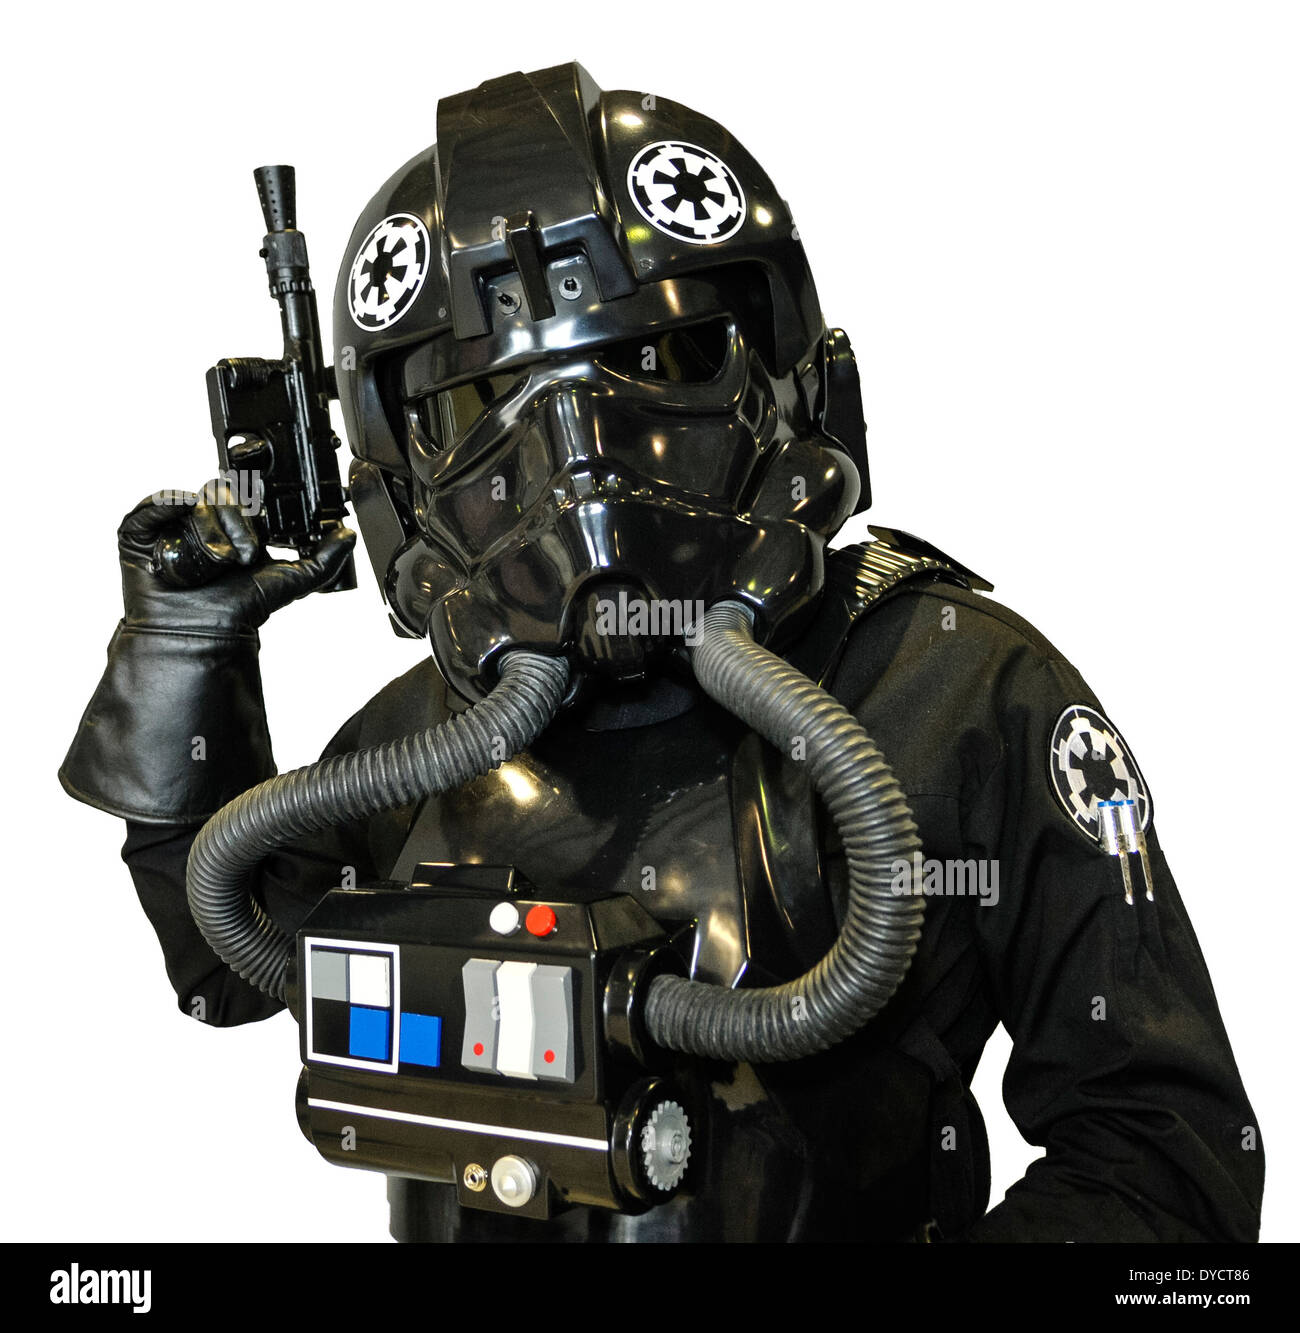 Tie Fighter Pilot Images Check out our tie fighter pilot selection for ...